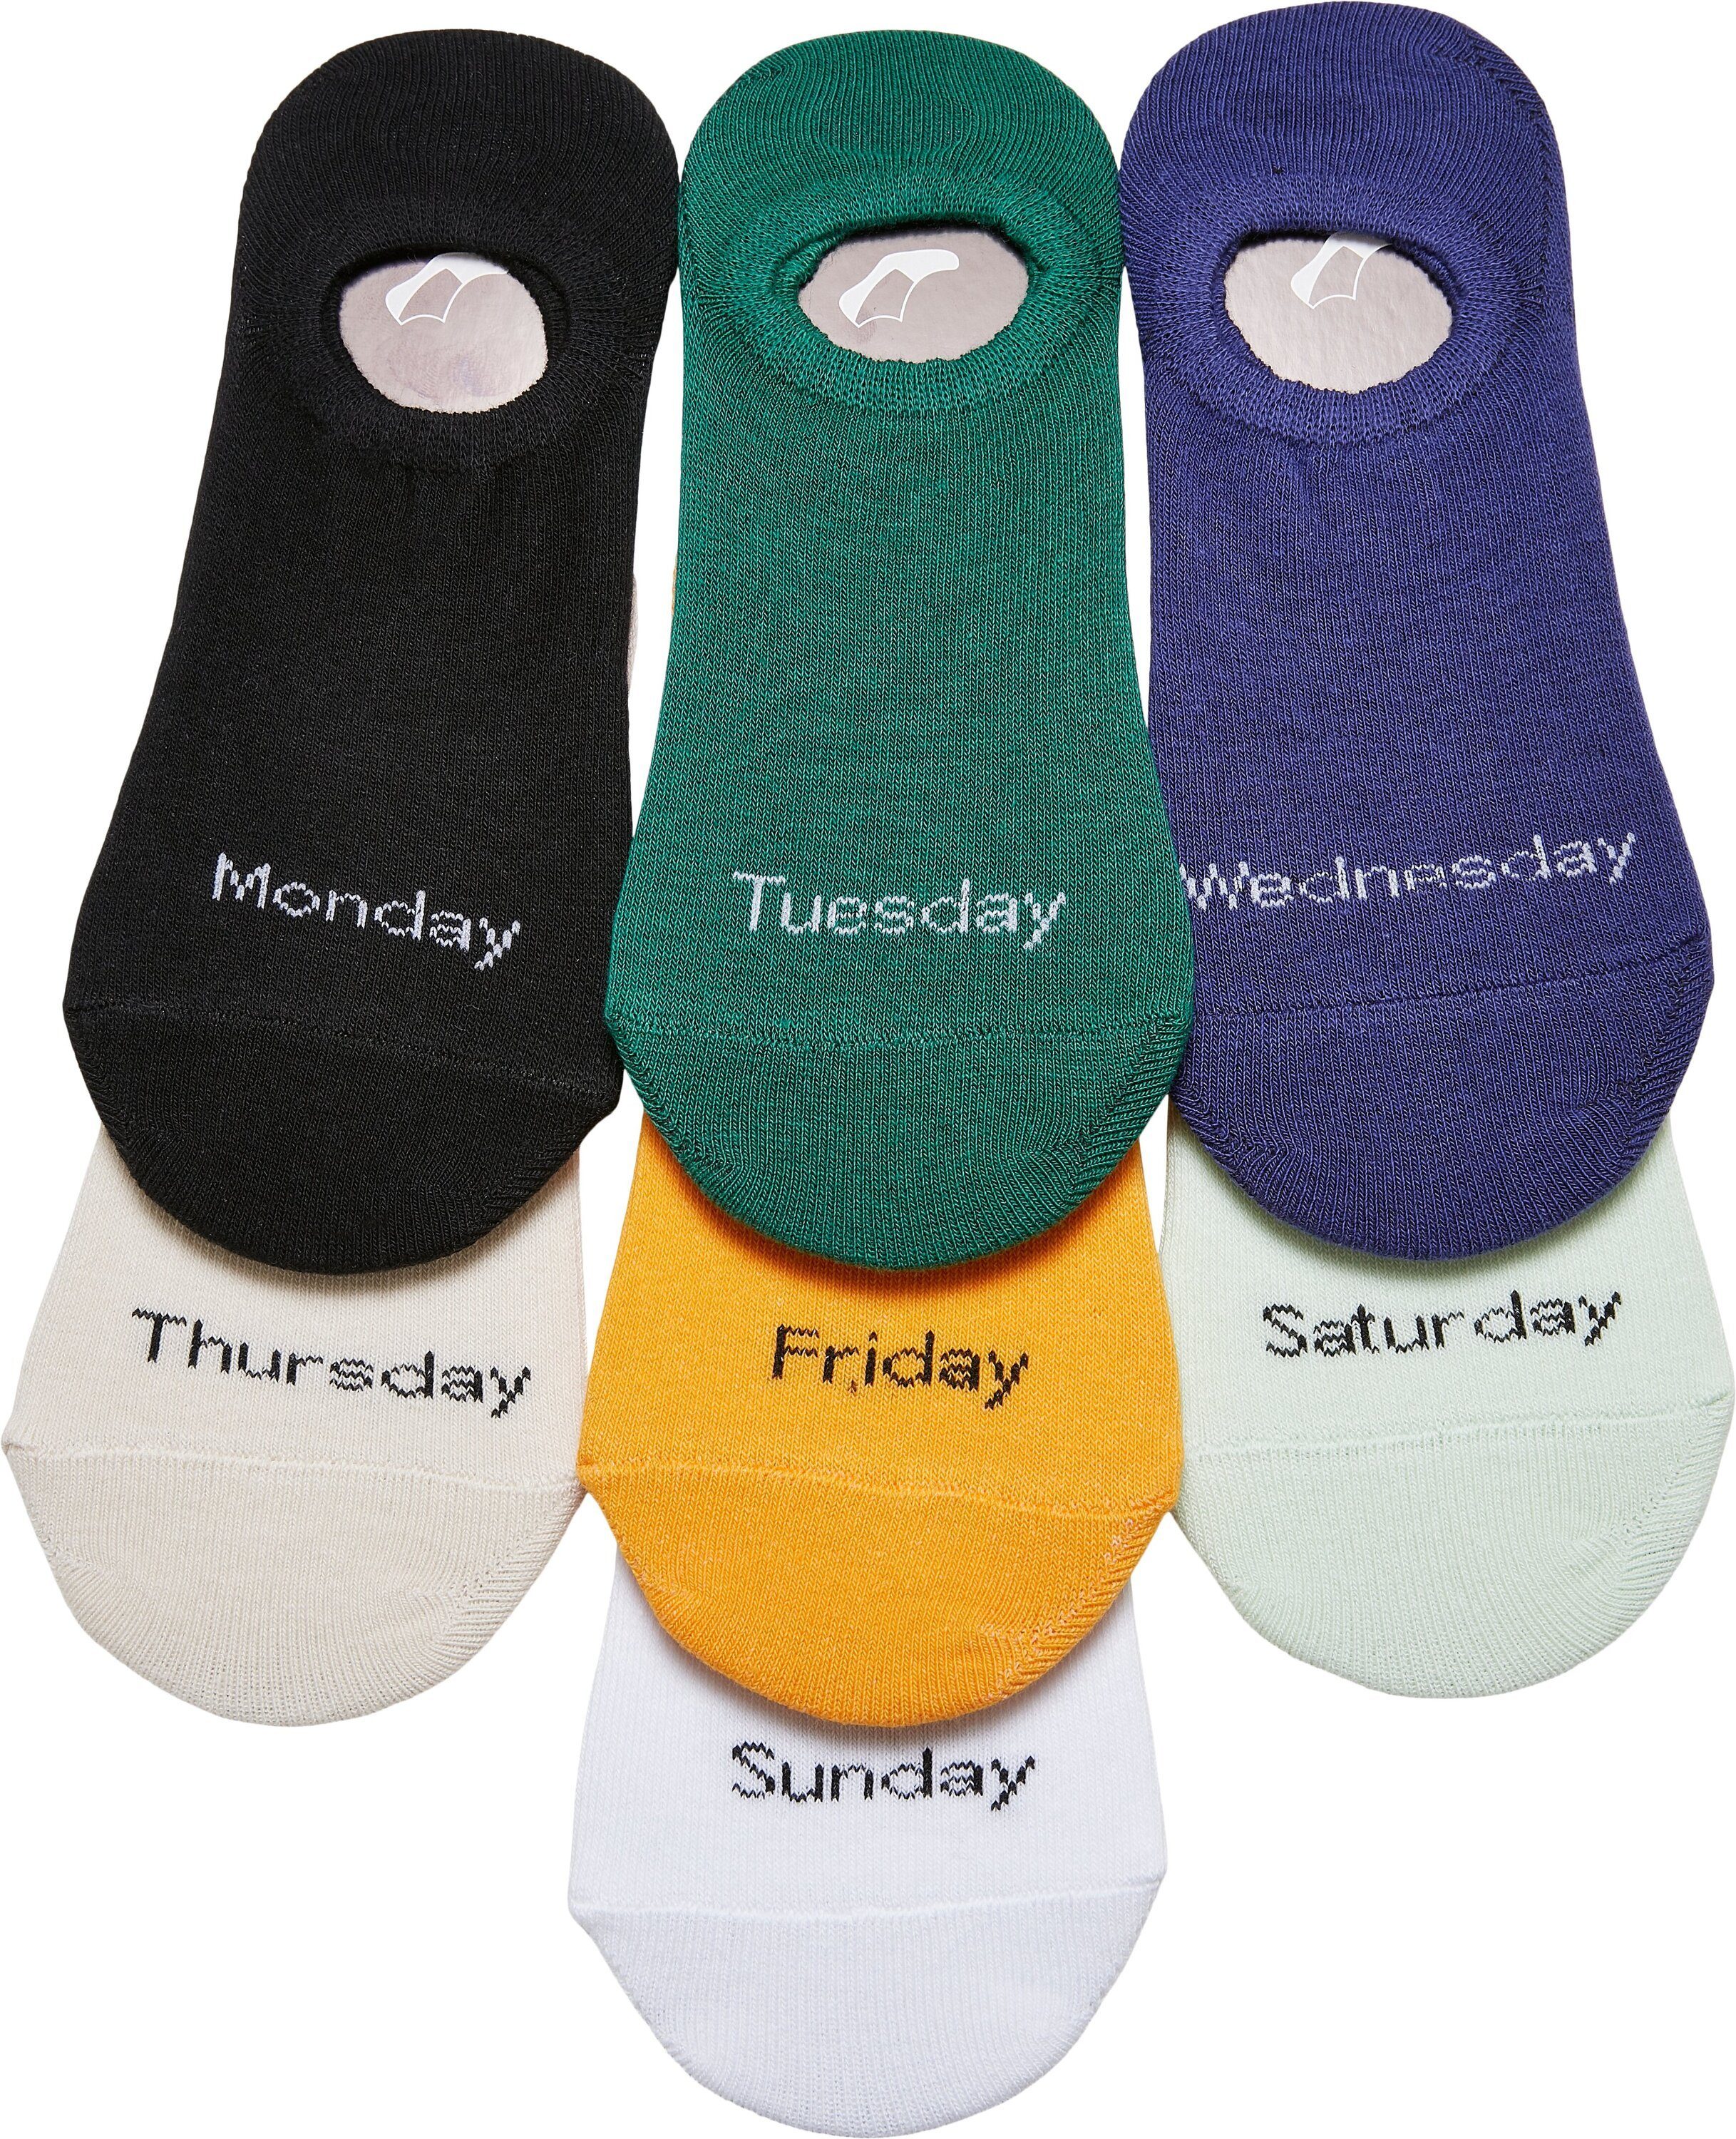 Freizeitsocken URBAN multicolor Socks Weekly Accessoires 7-Pack Invisible (1-Paar) CLASSICS